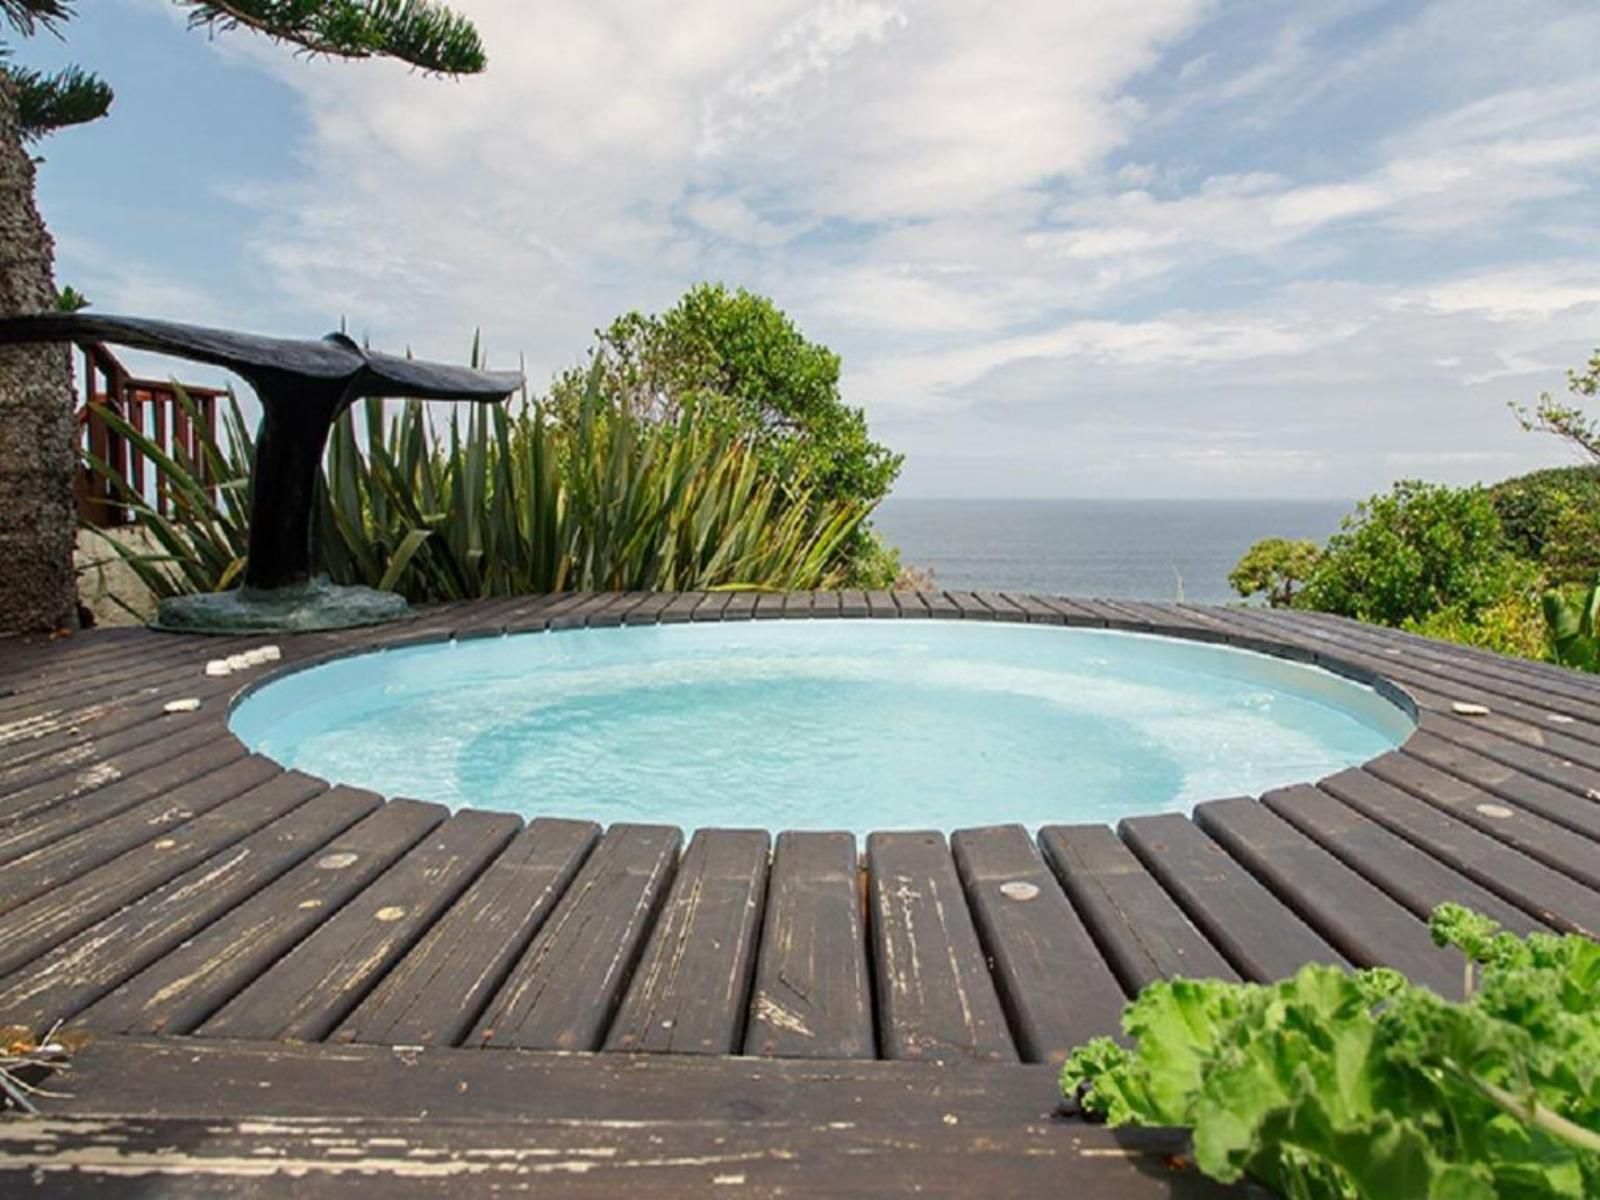 Whales Way Ocean Retreat Bandb Wilderness Western Cape South Africa Beach, Nature, Sand, Garden, Plant, Swimming Pool